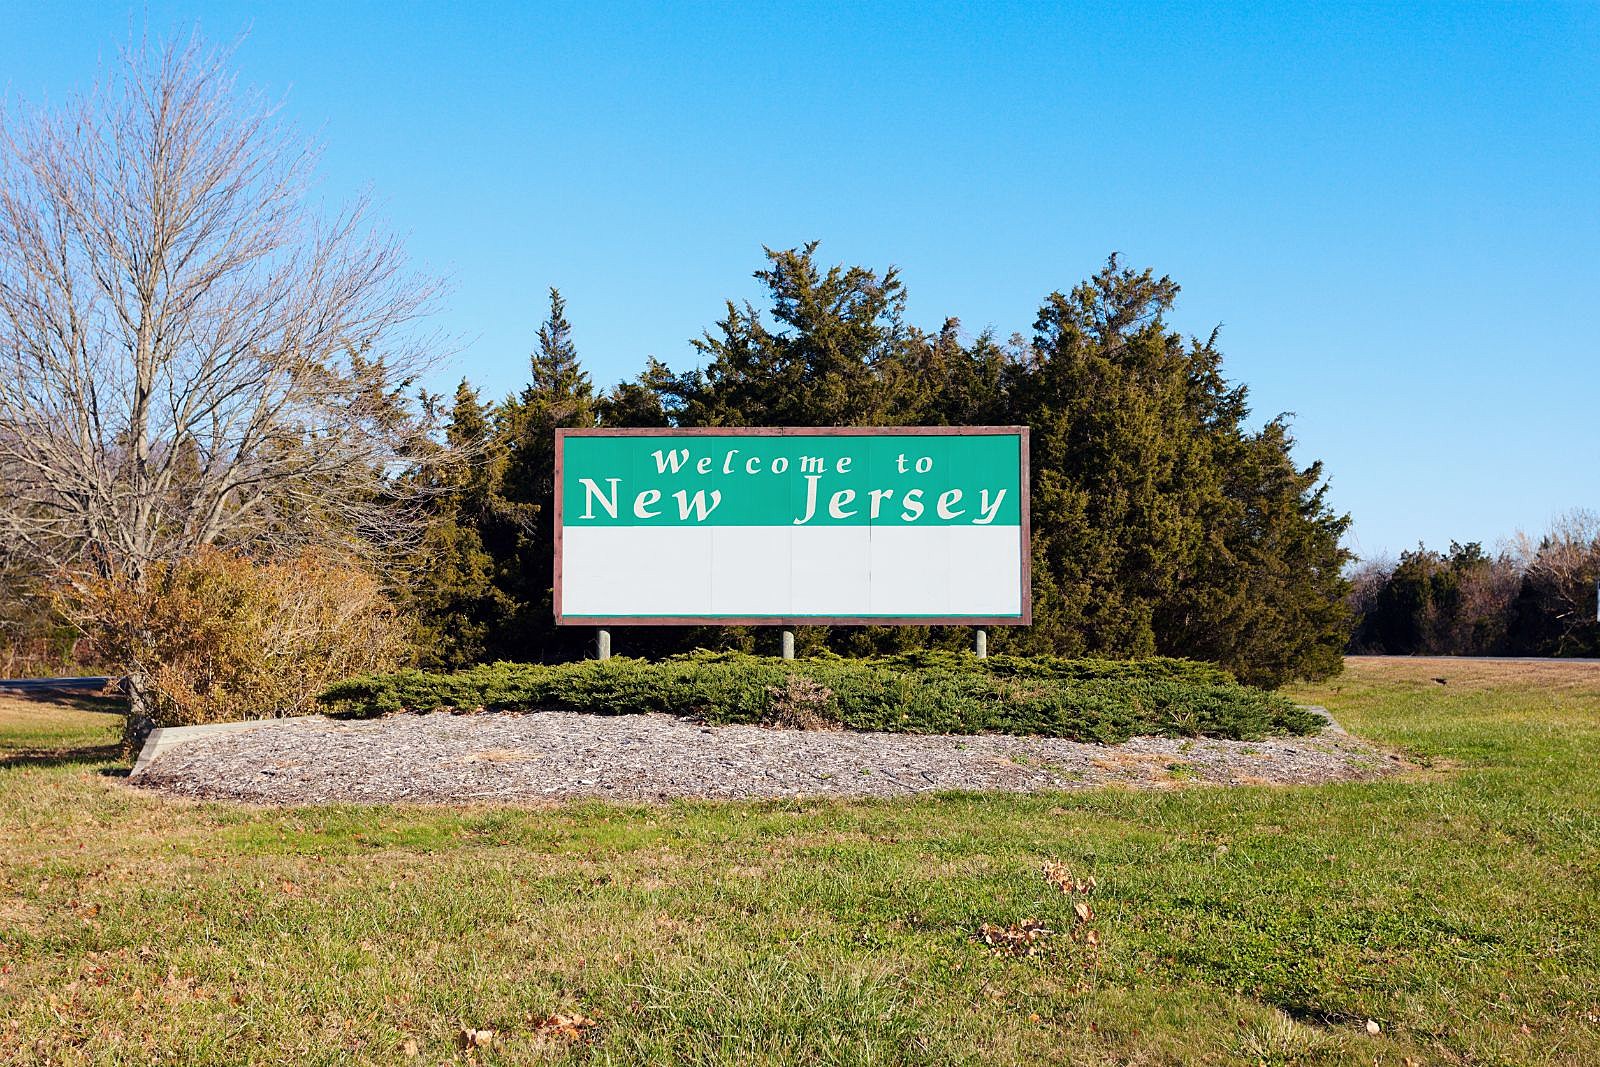 New Jersey Sign Photo from Canva Images